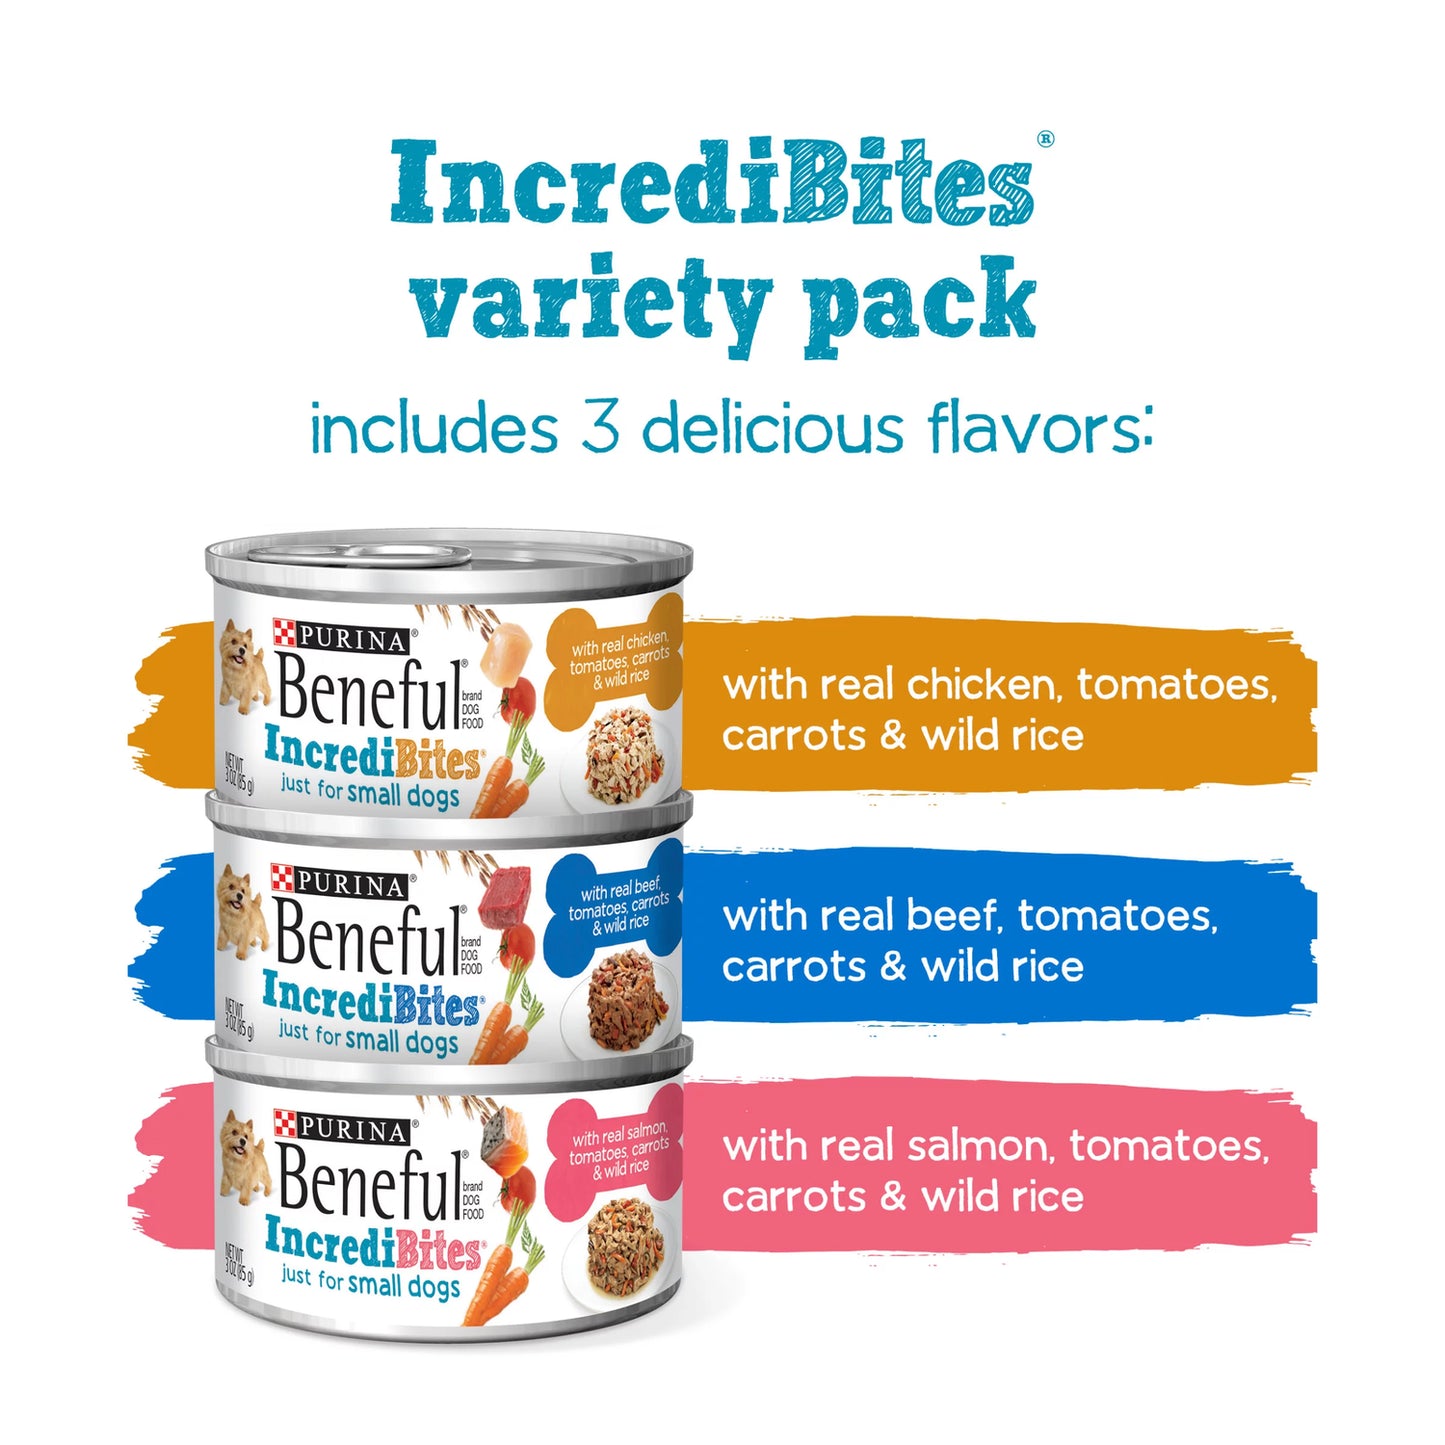 (12 Pack) Purina Beneful Small Breed Wet Dog Food Variety Pack, Incredibites with Real Beef, Chicken or Salmon, 3 Oz. Cans